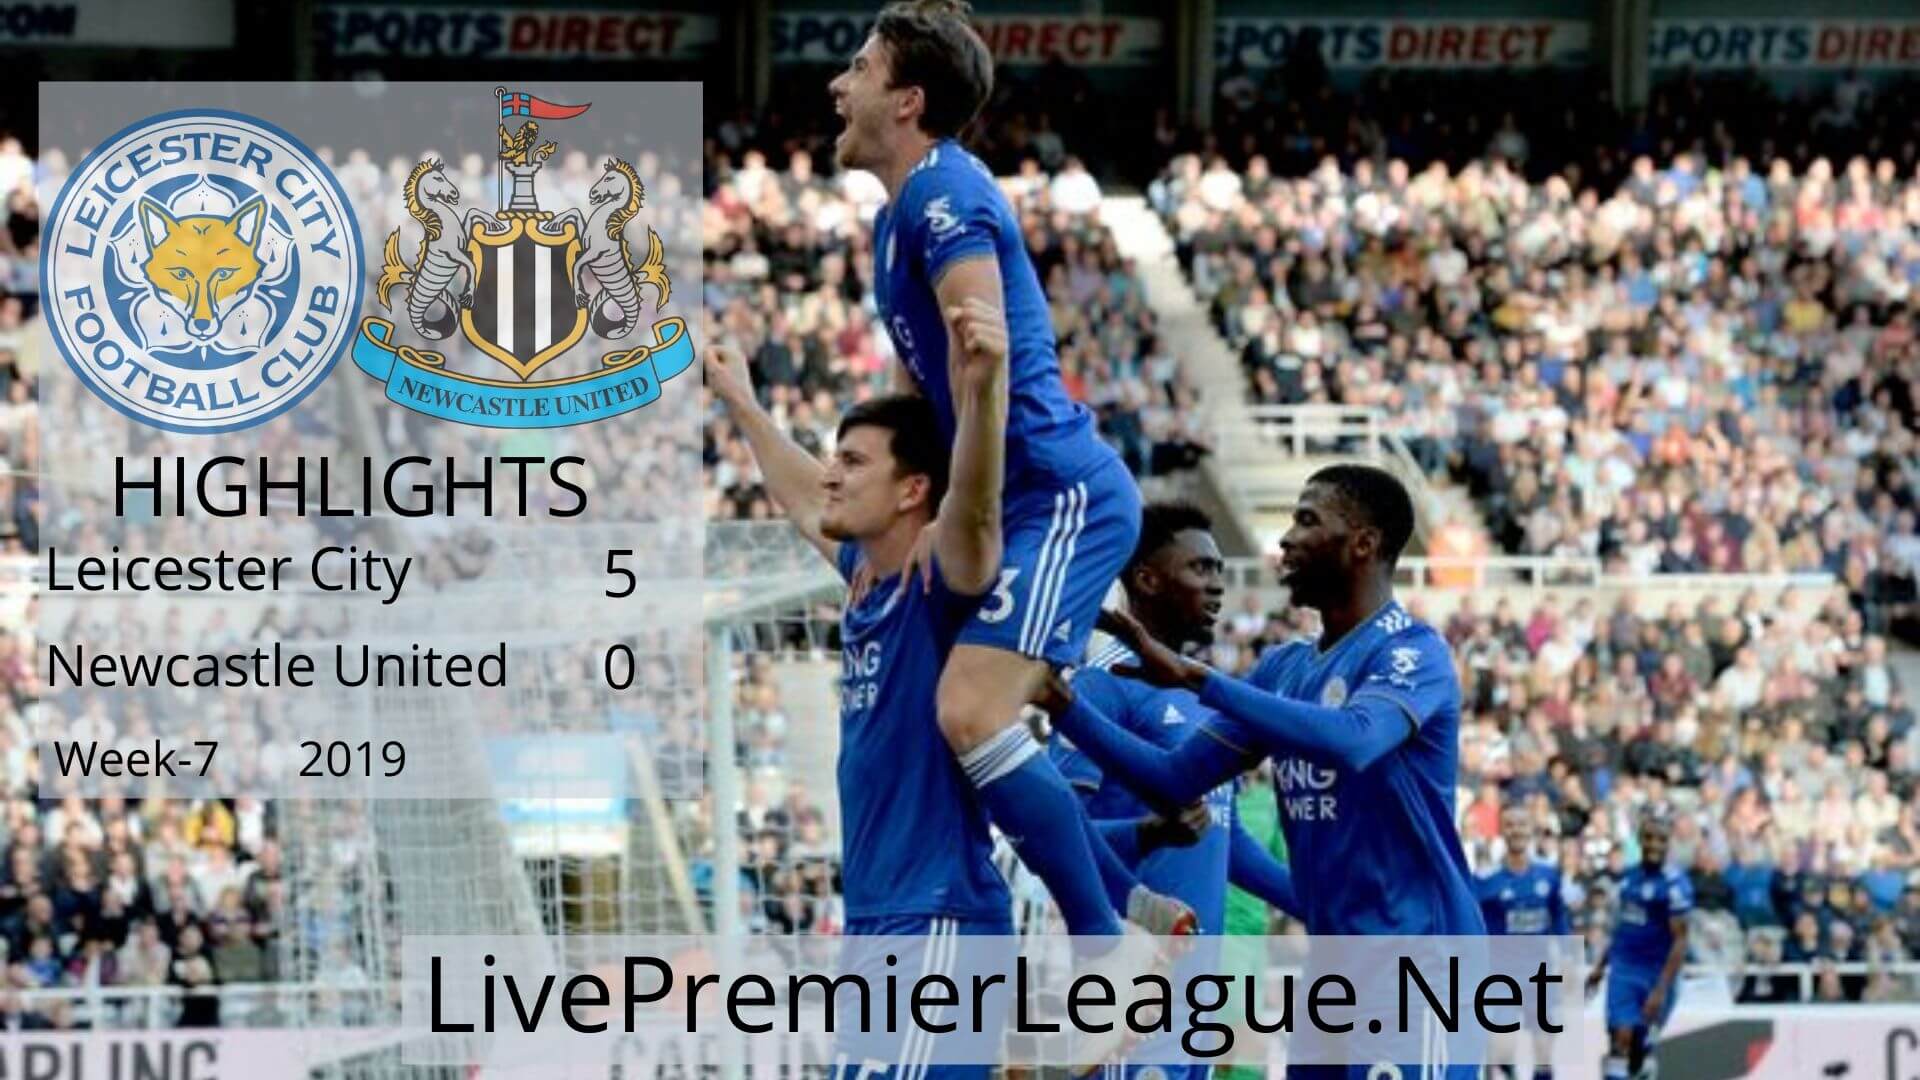 Leicester city vs Newcastle United Highlights 2019 Week 7